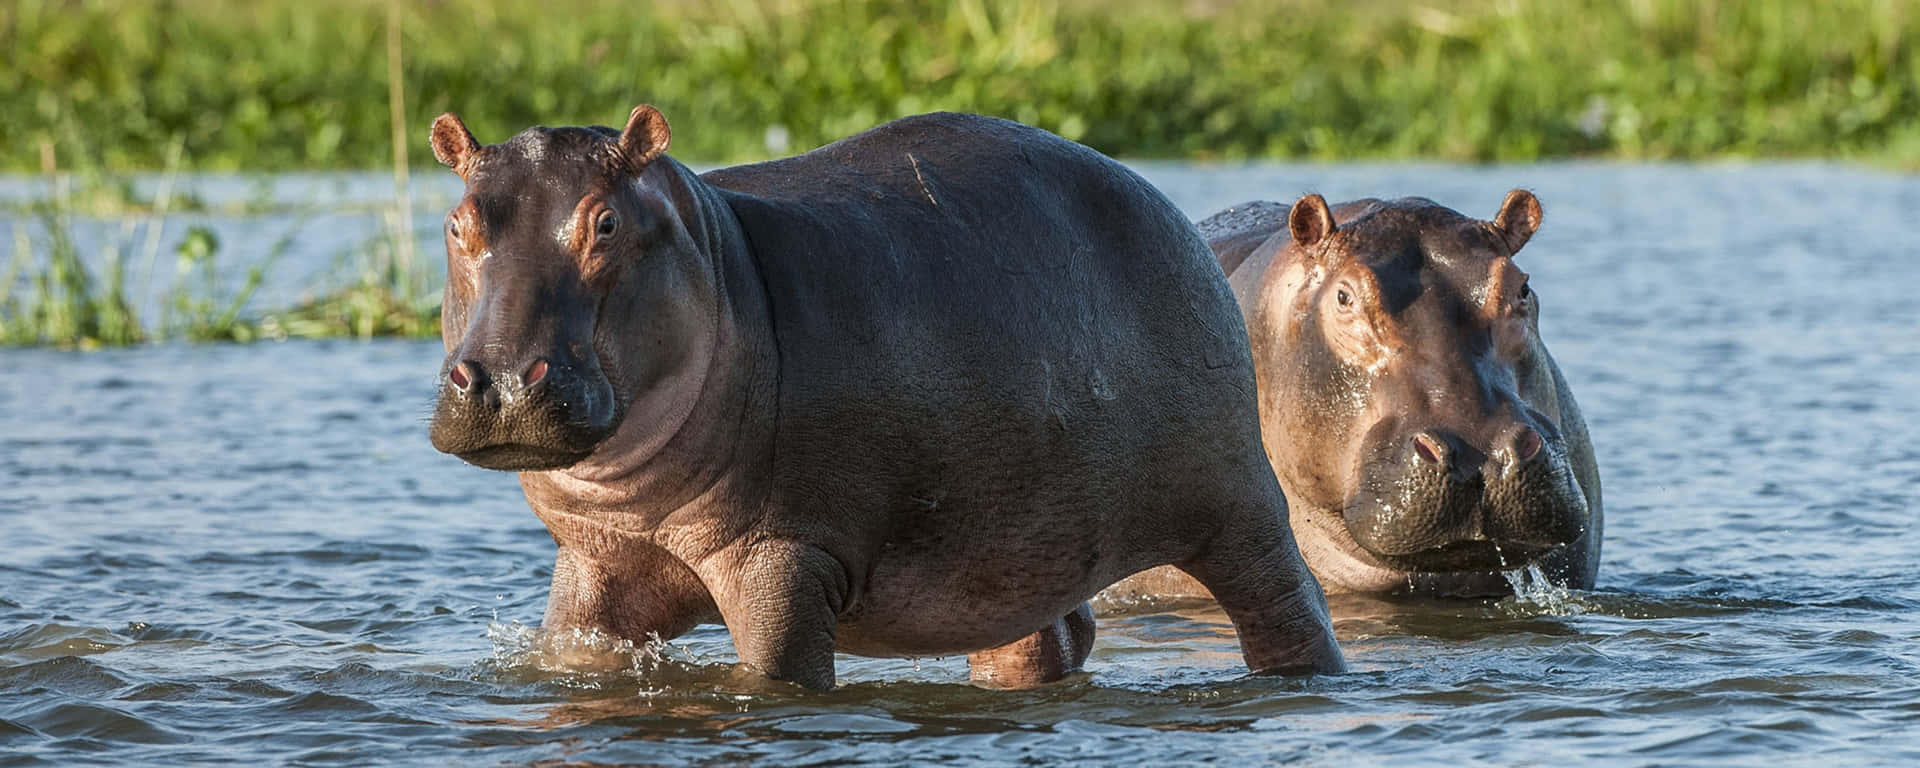 A Close-Up of a Hippo